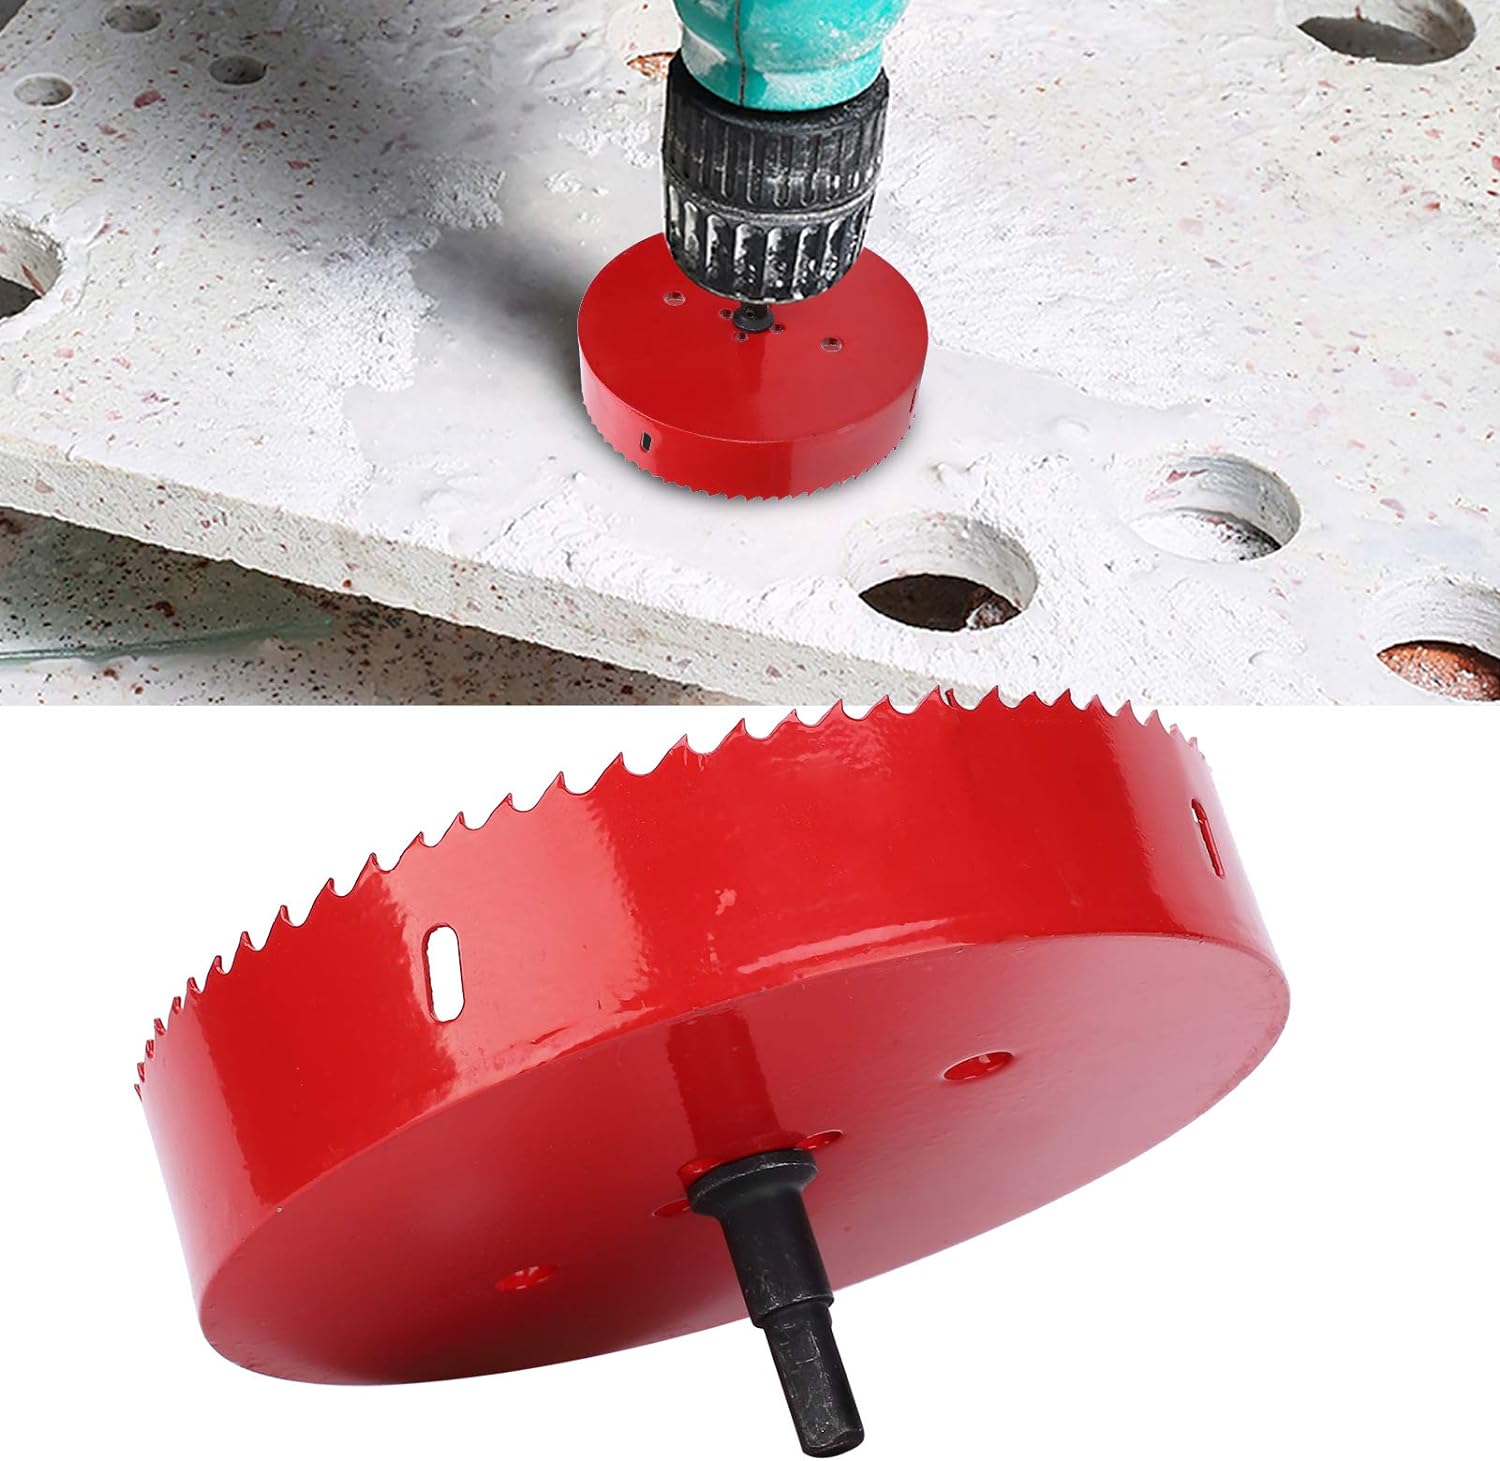 Drilling Holes in Metal. The 15 Best Tips for Using 2 Inch Hole Saws